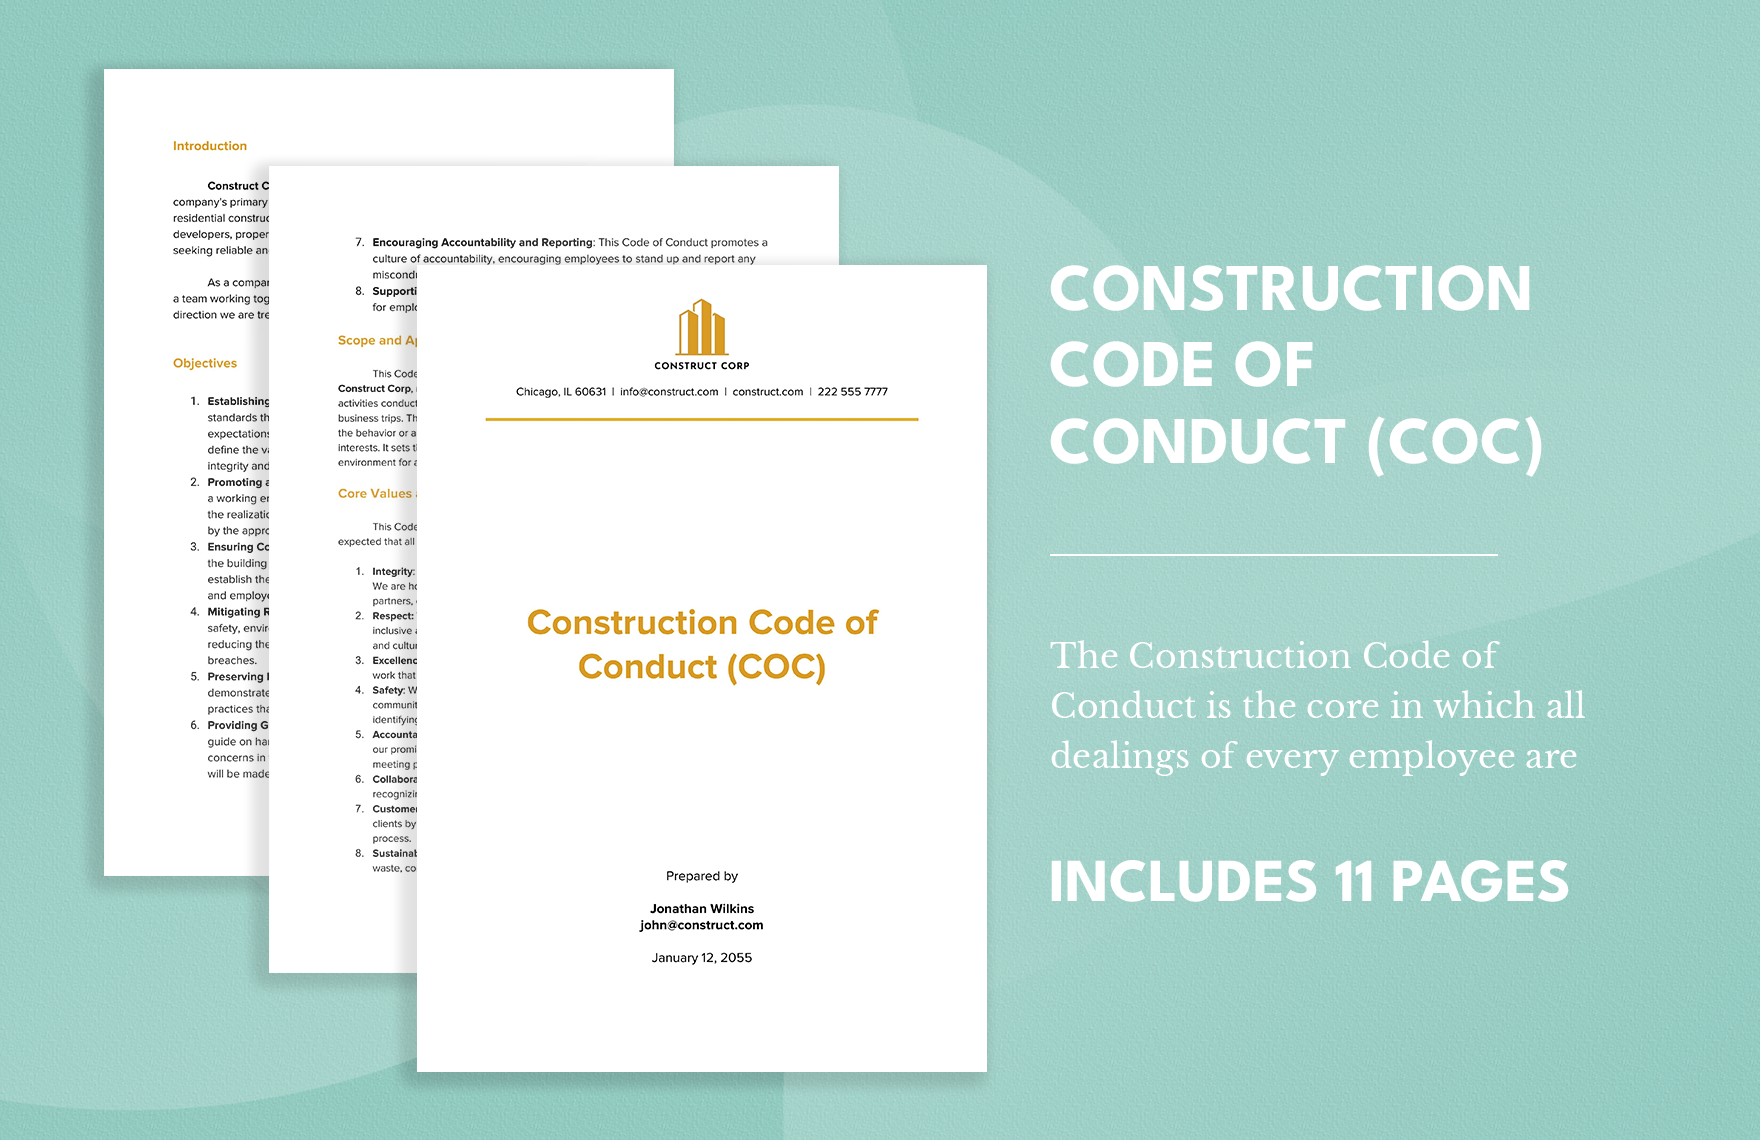 Code of Conduct (COC)